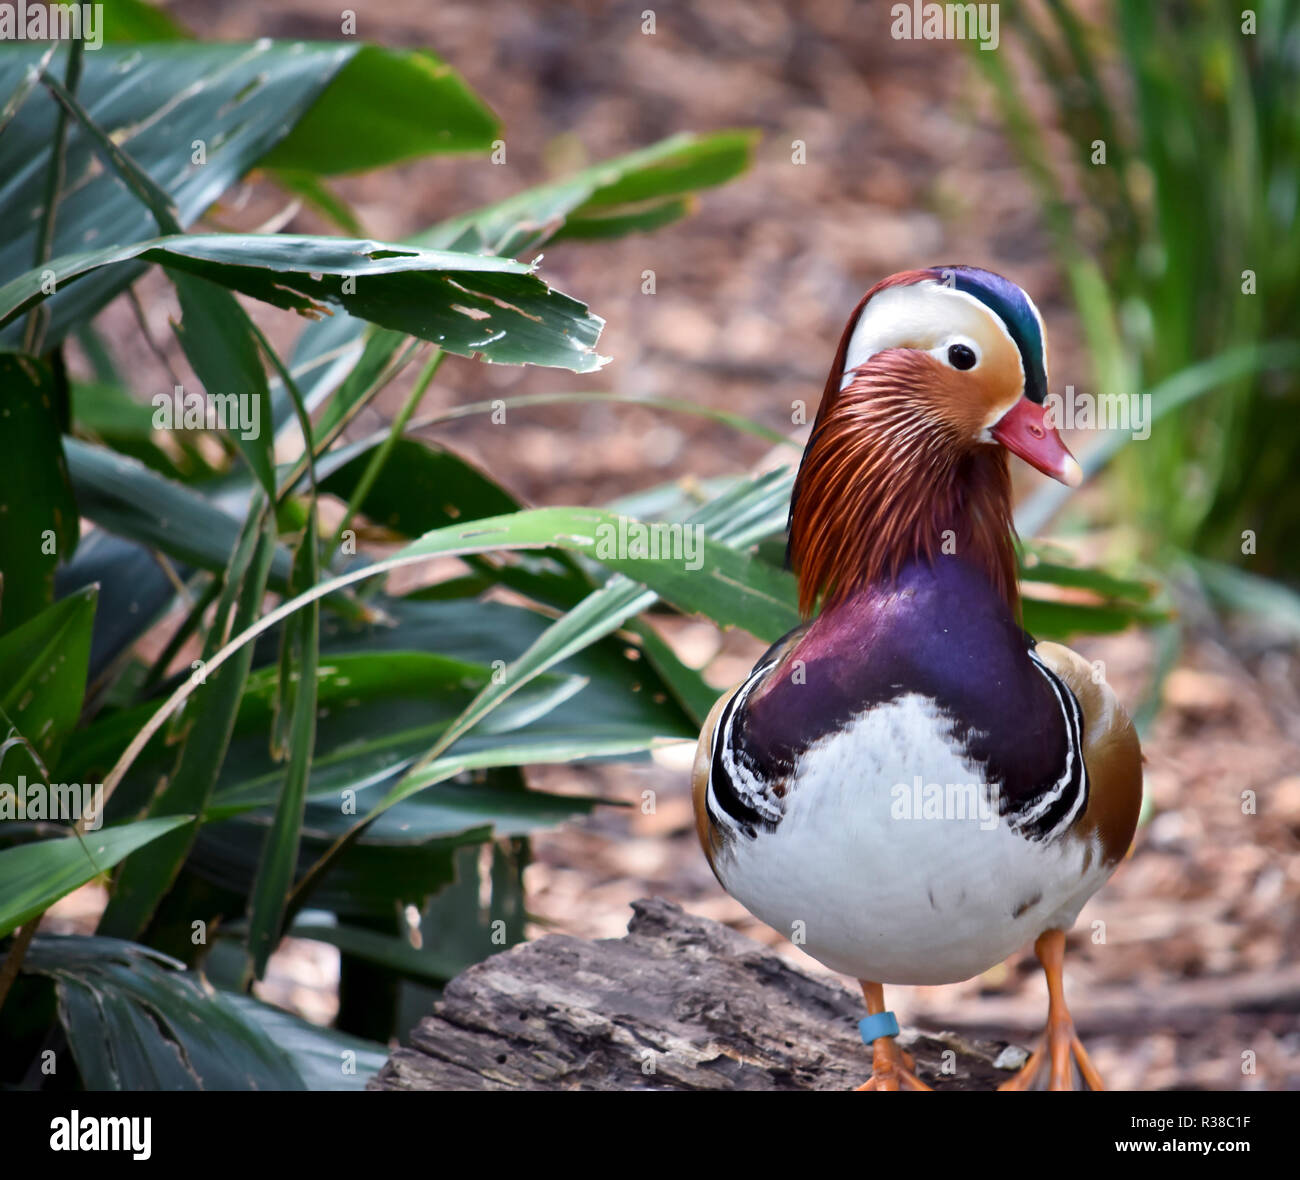 the male mandarine duck is standing on a log Stock Photo